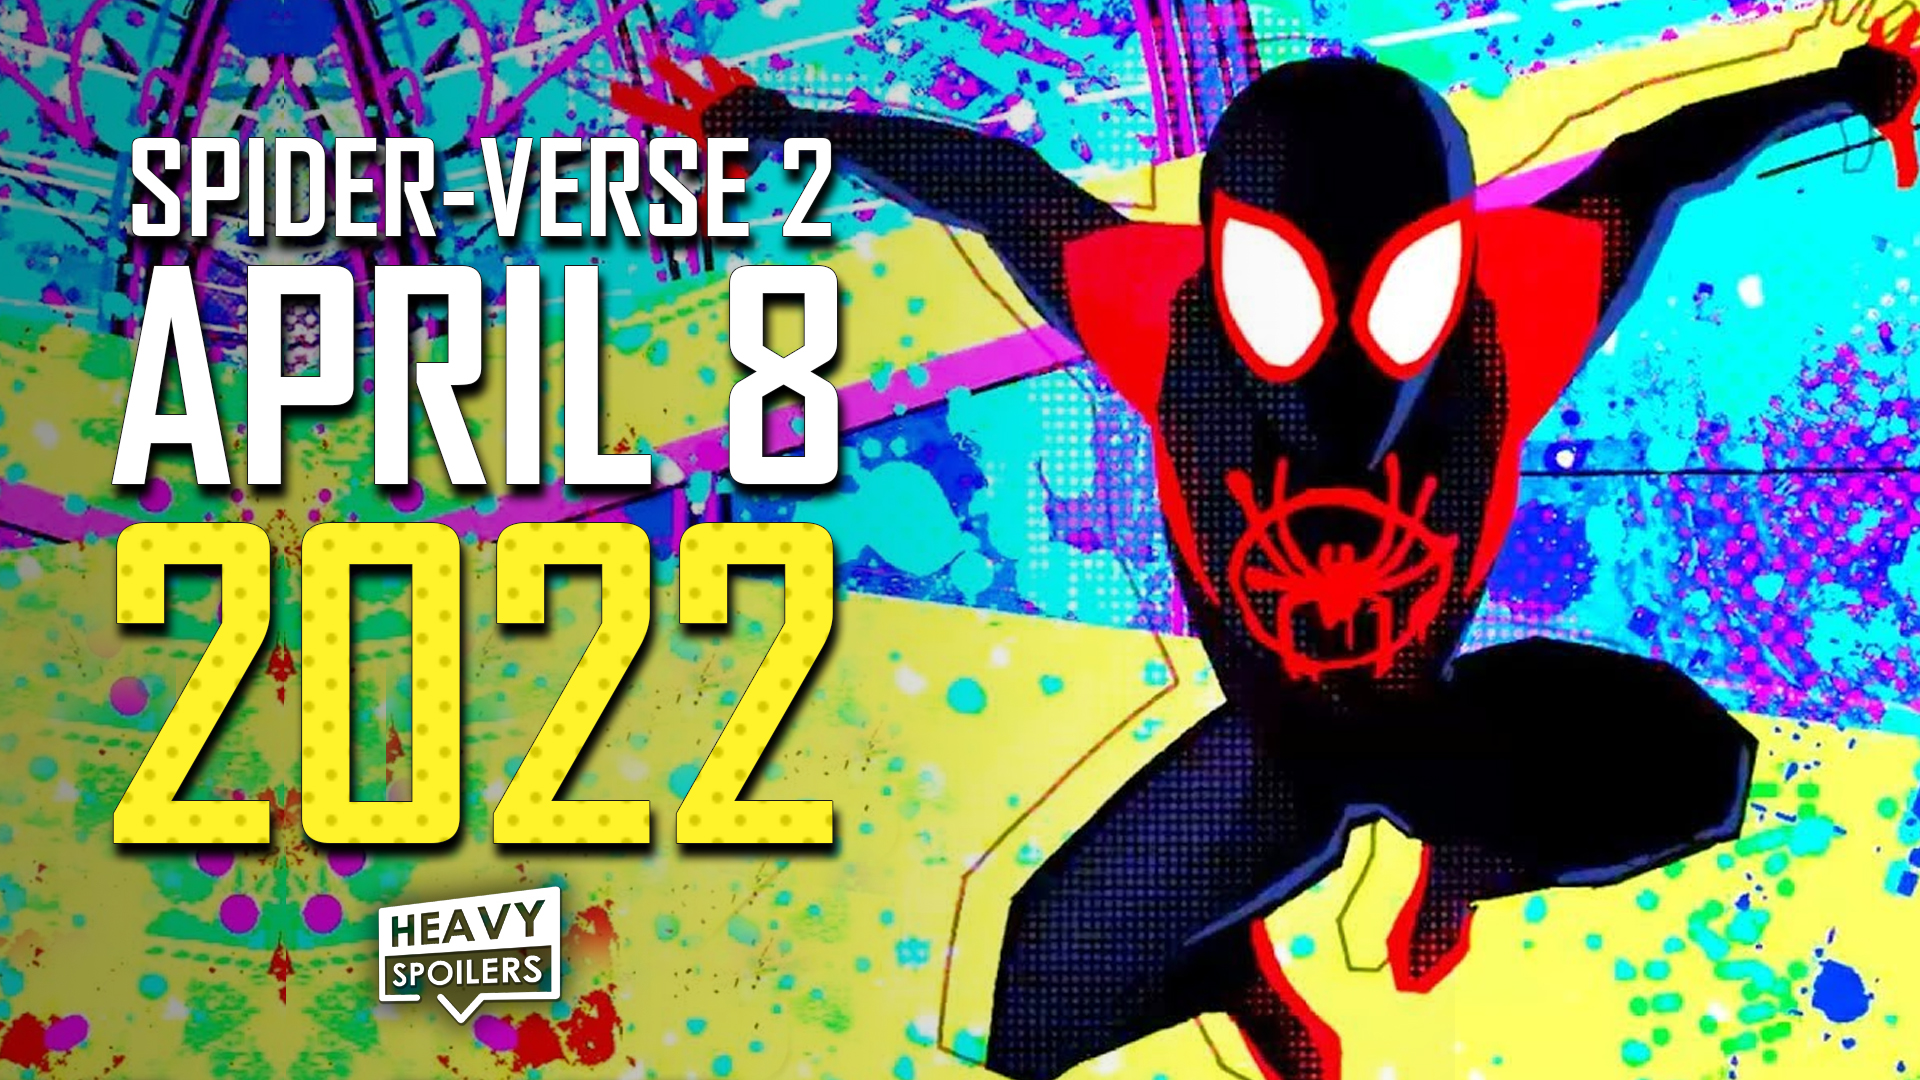 spider man into the spider verse 2 announced release date ant man 3 news spiderman characters everything we know so far peyton reed antman